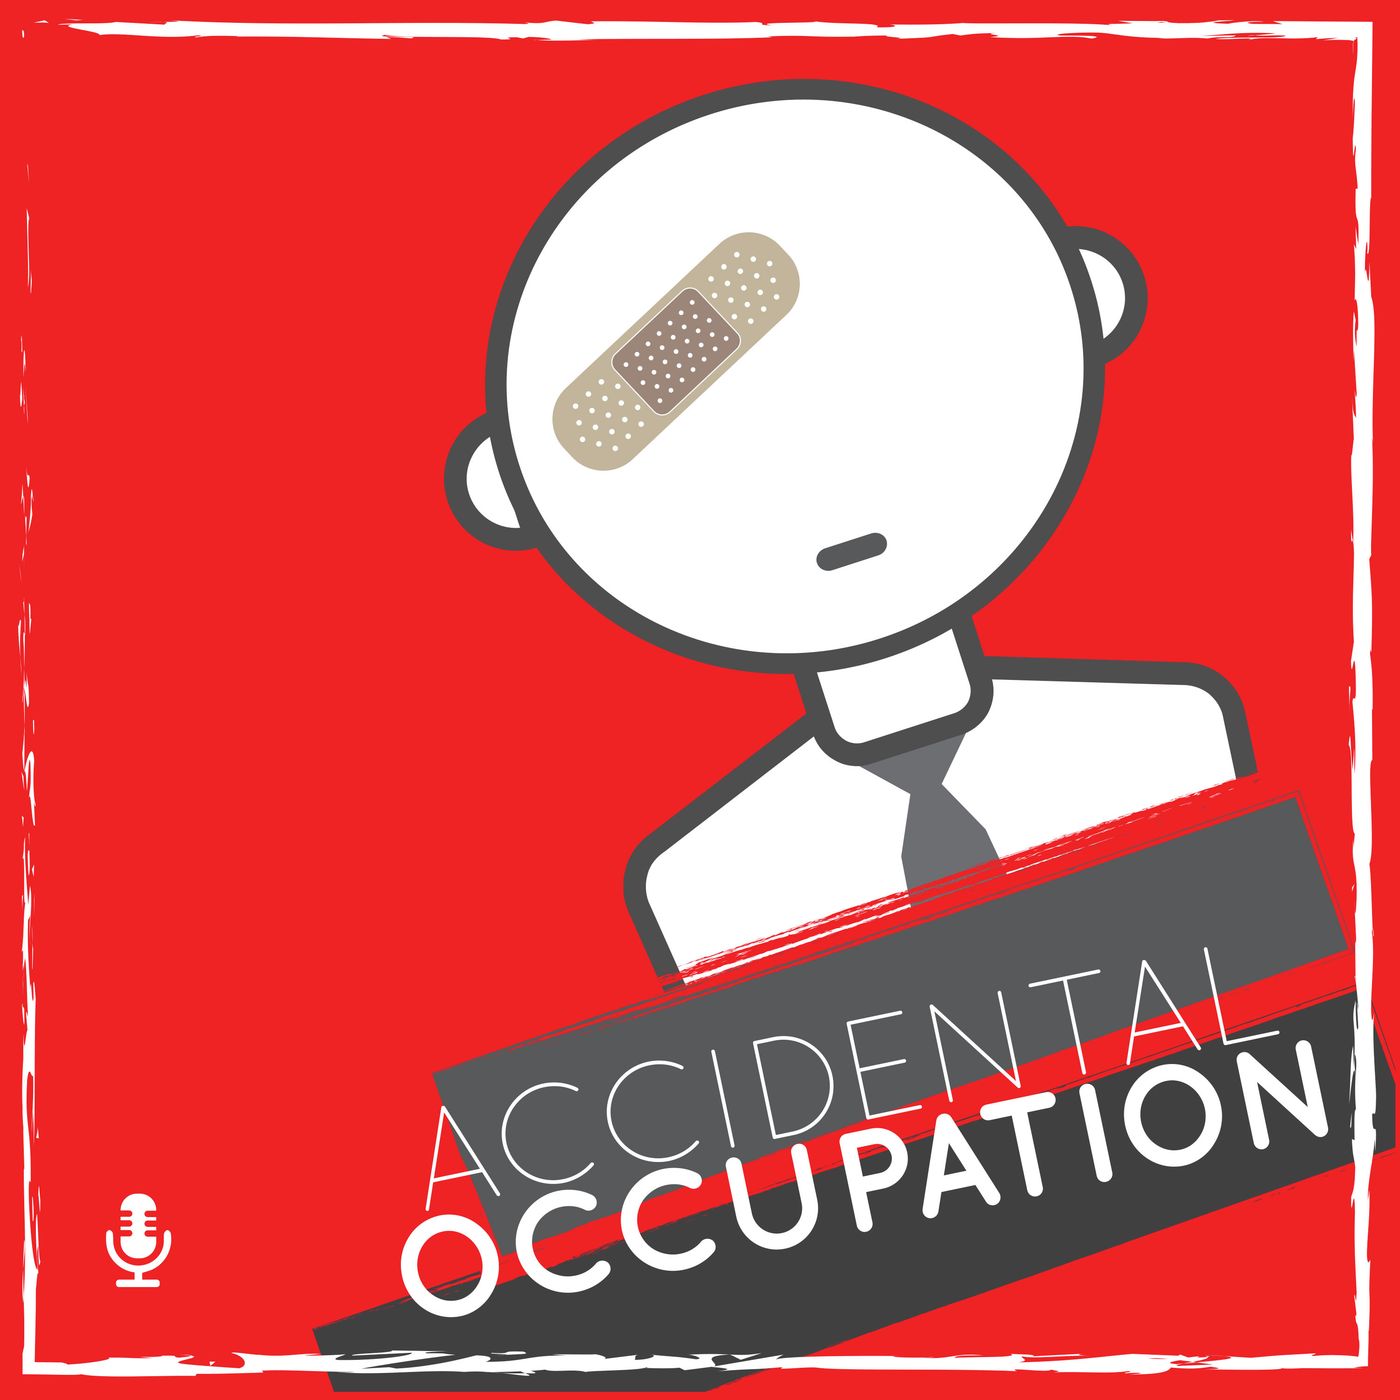 The Accidental Occupation